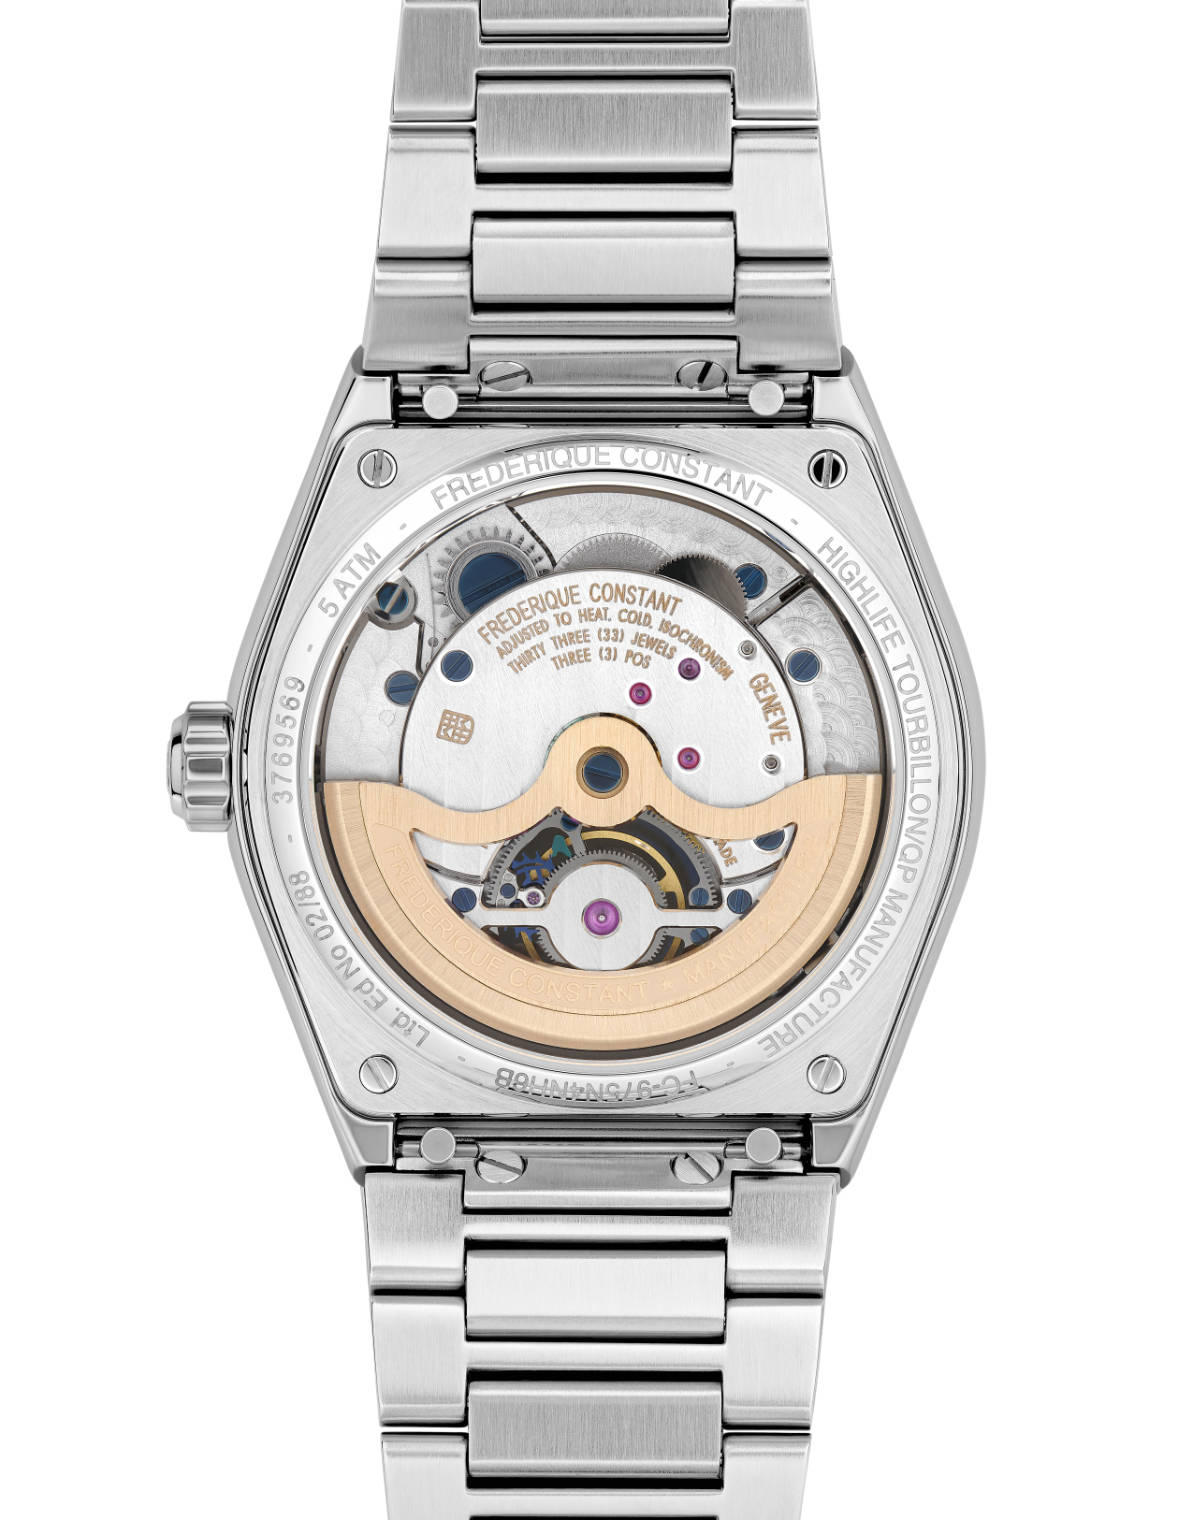 Highlife Tourbillon Perpetual Calendar Manufacture: Fine Watchmaking Revisited